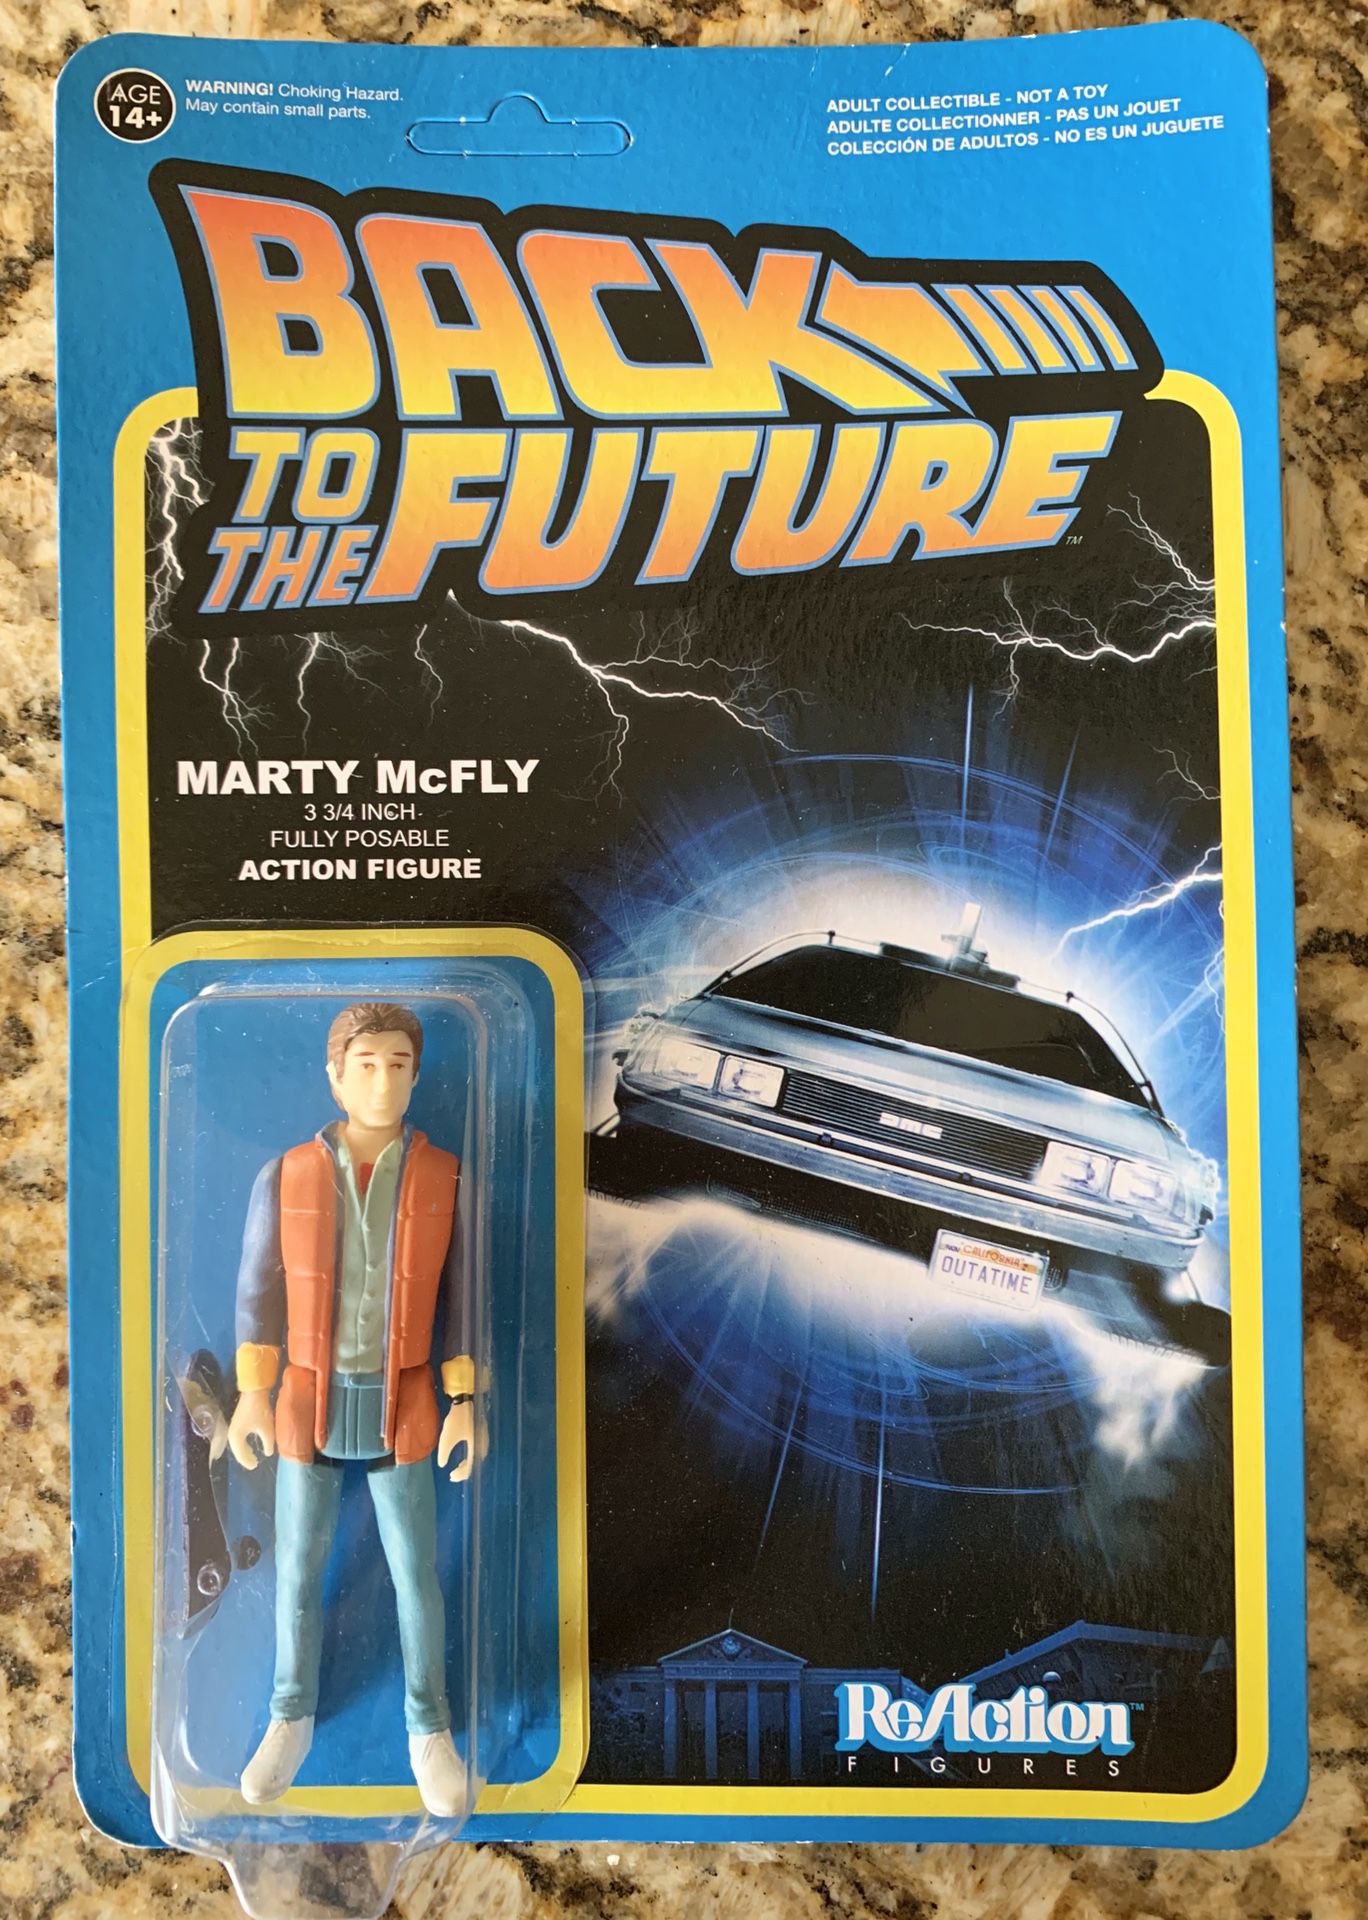 Collectible FUNKO ReAction Back to the Future Marty McFly action figure